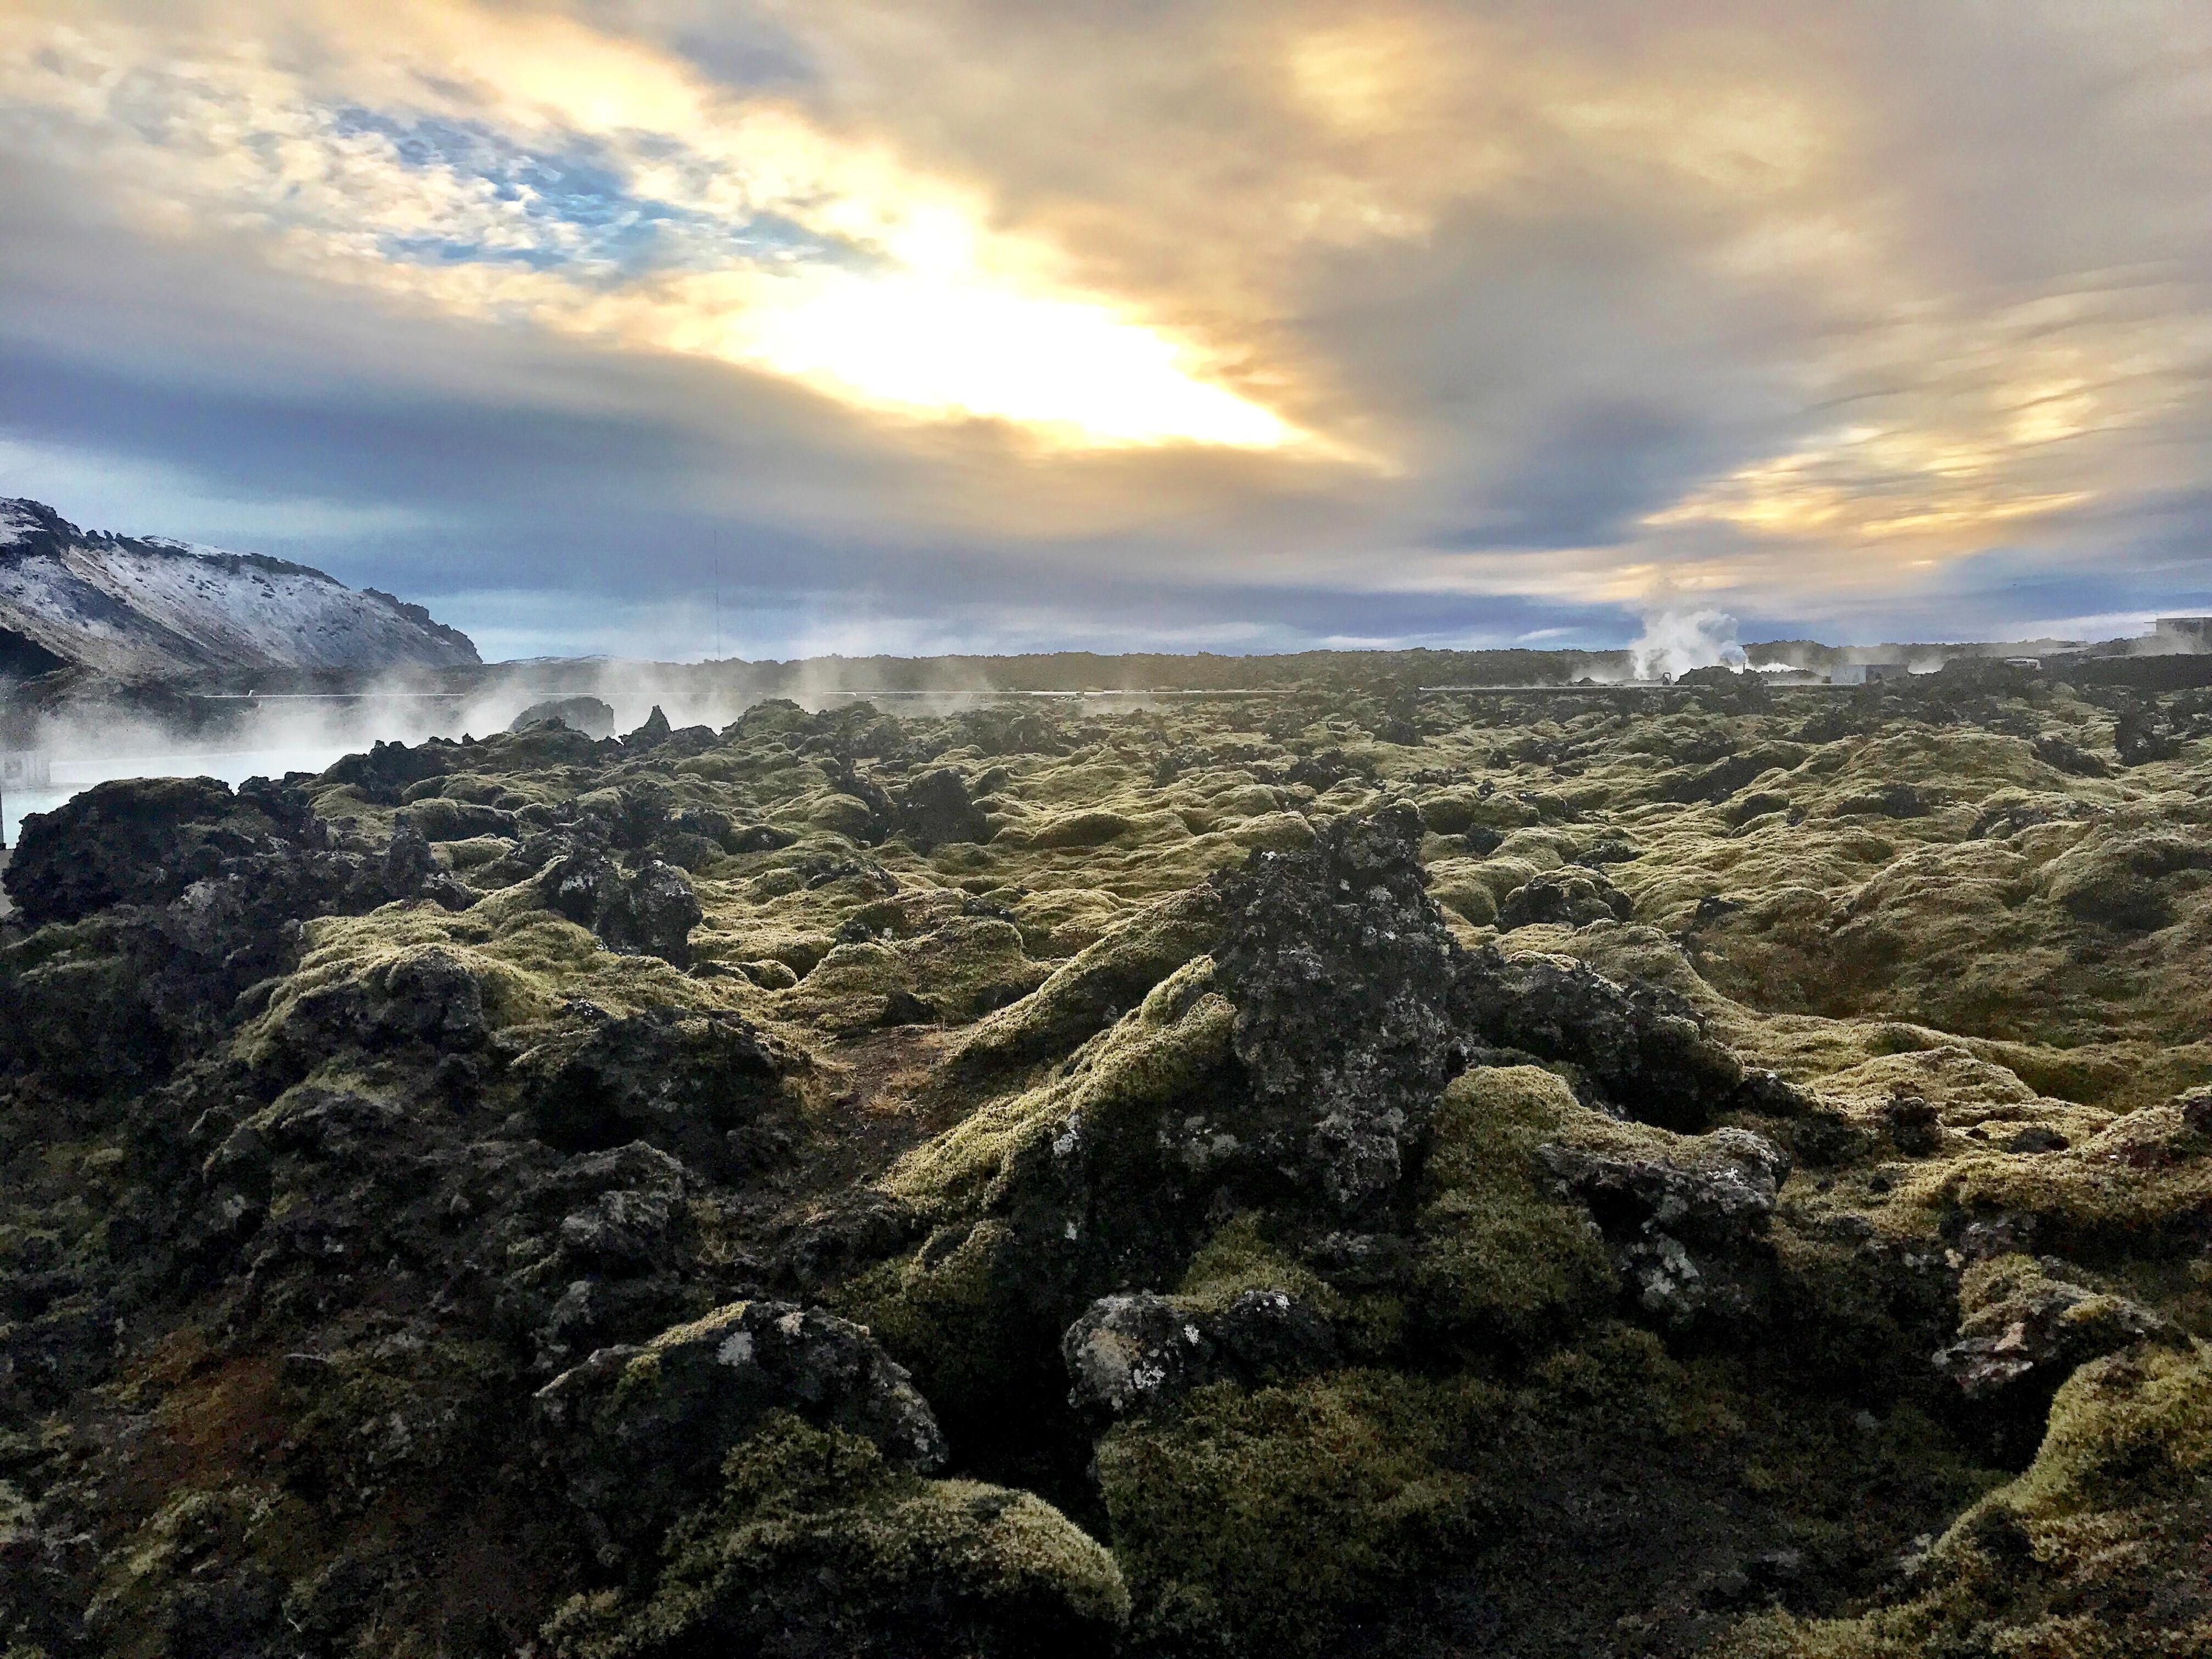 Verdant moss-covered lava field with wisps of smoke rising from the earth.